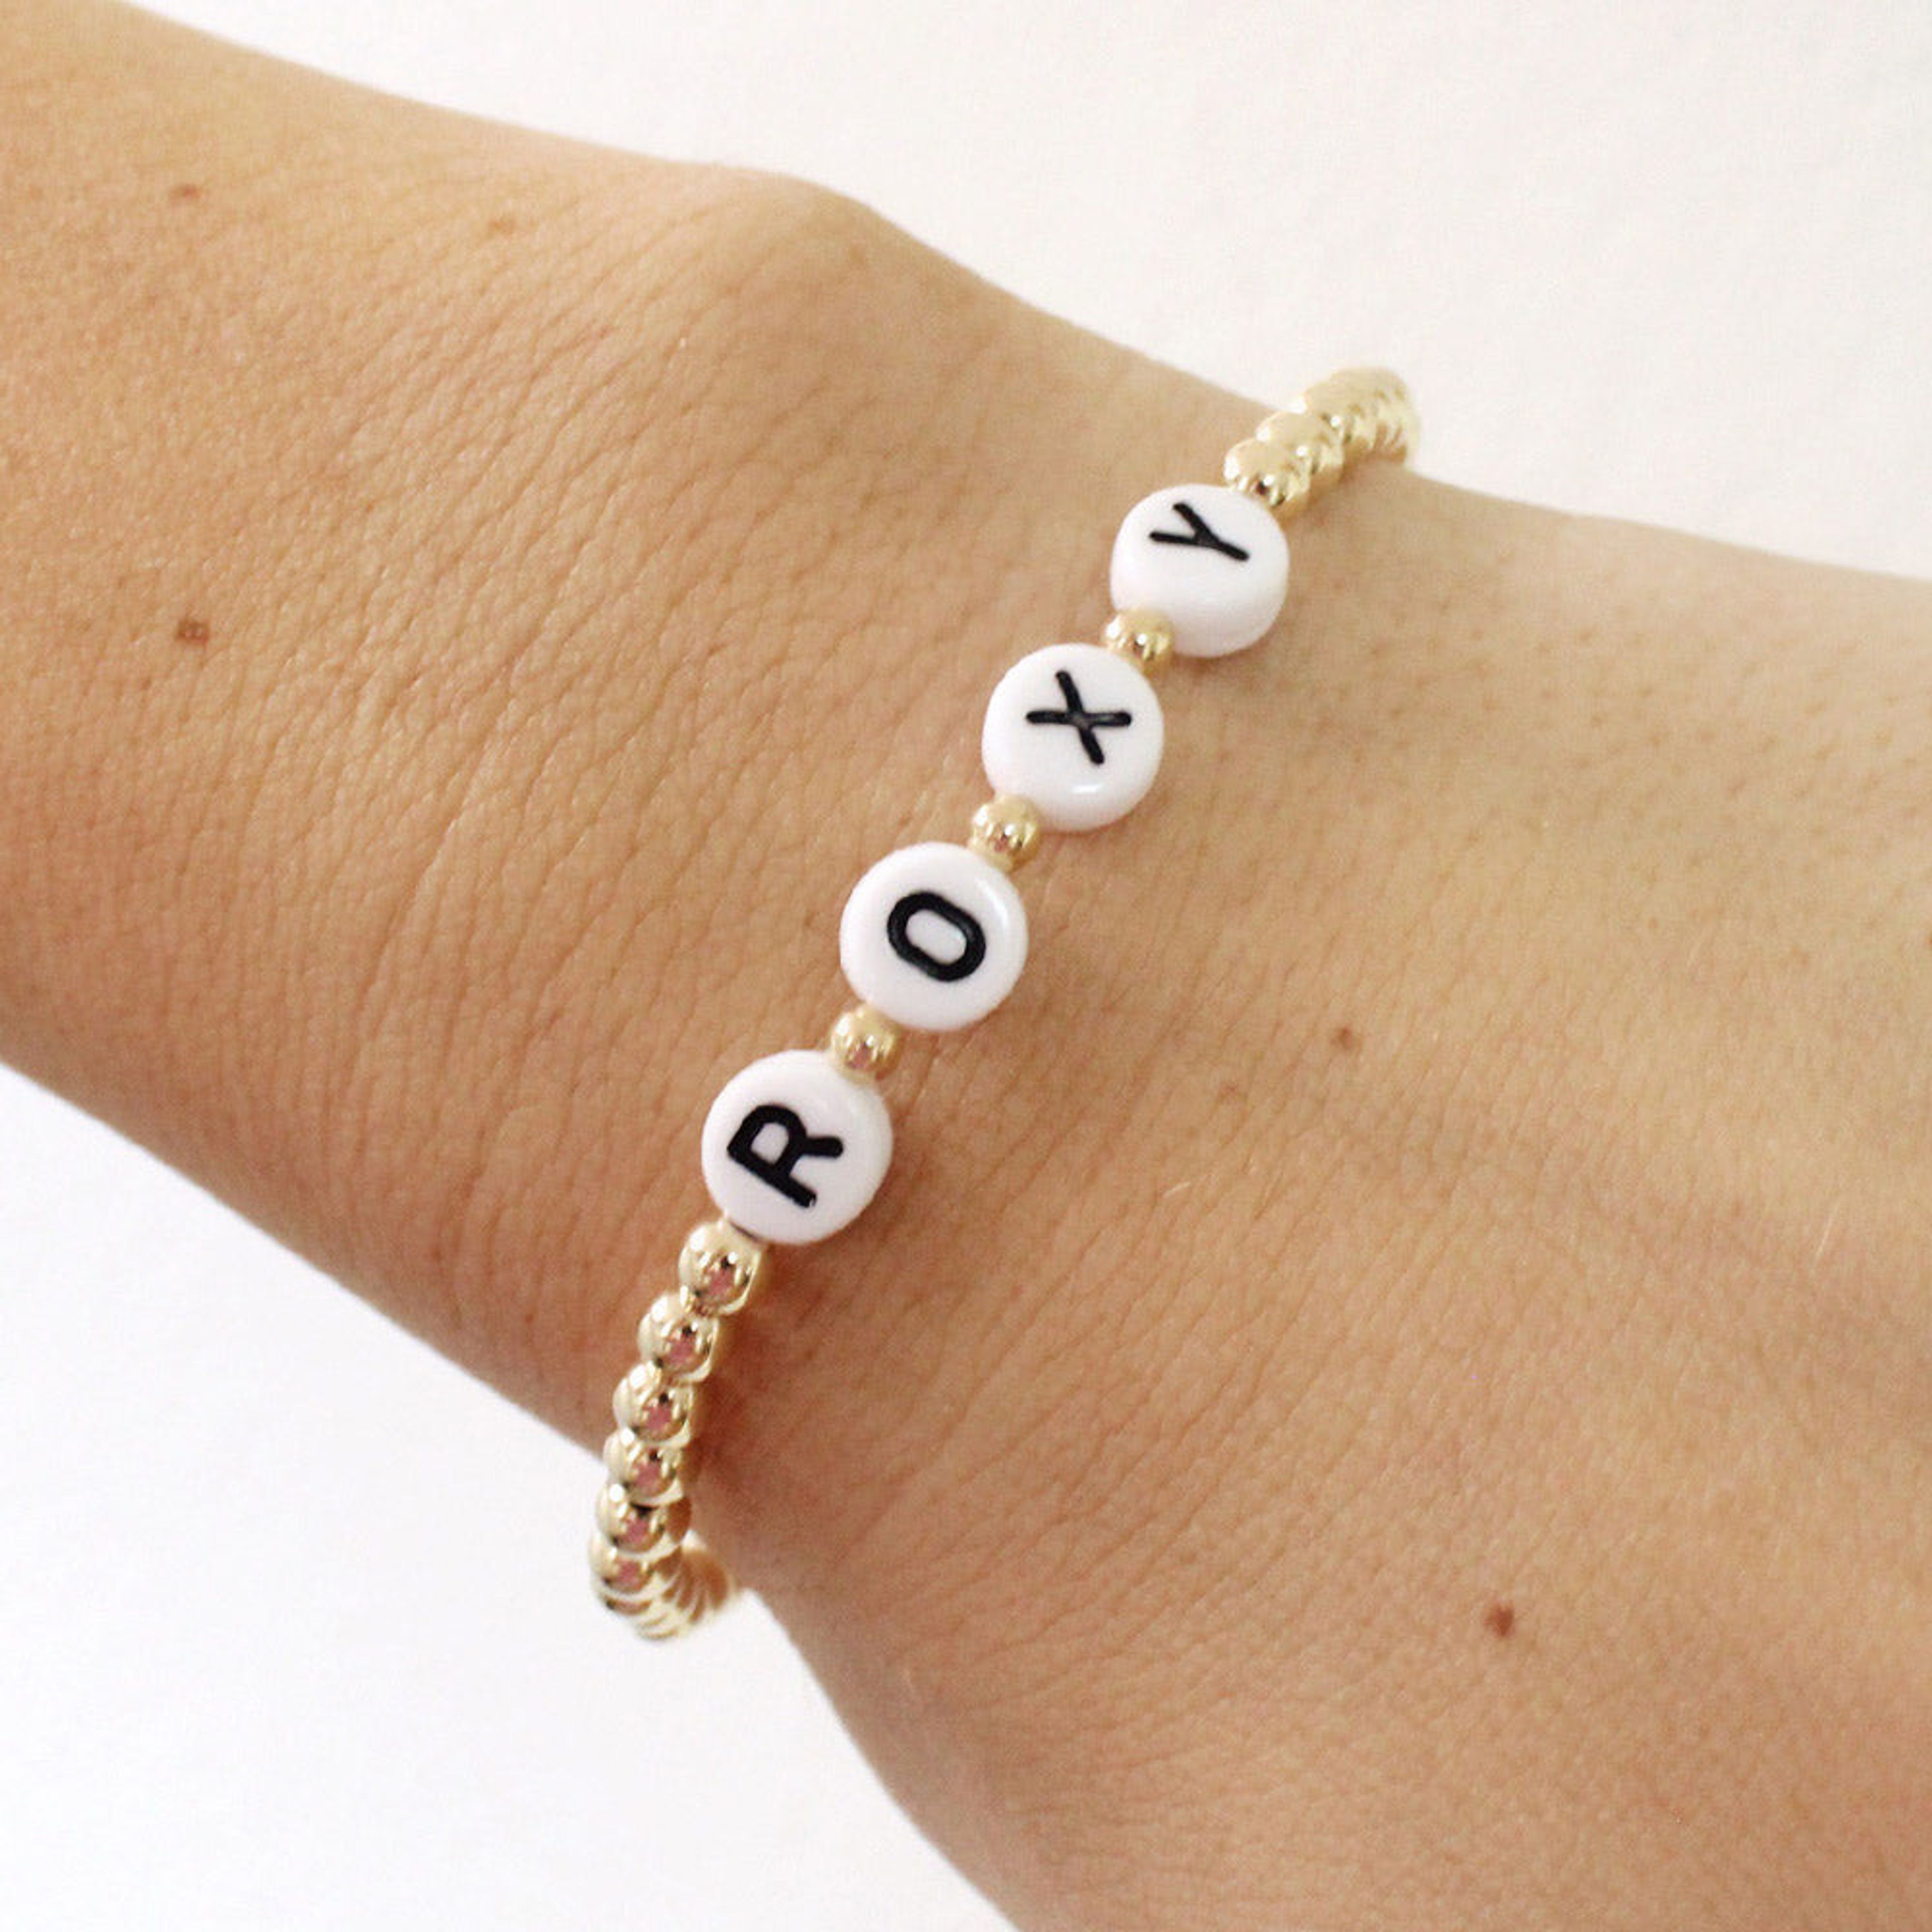 Writer's Block Bracelet (Different Letters Available)